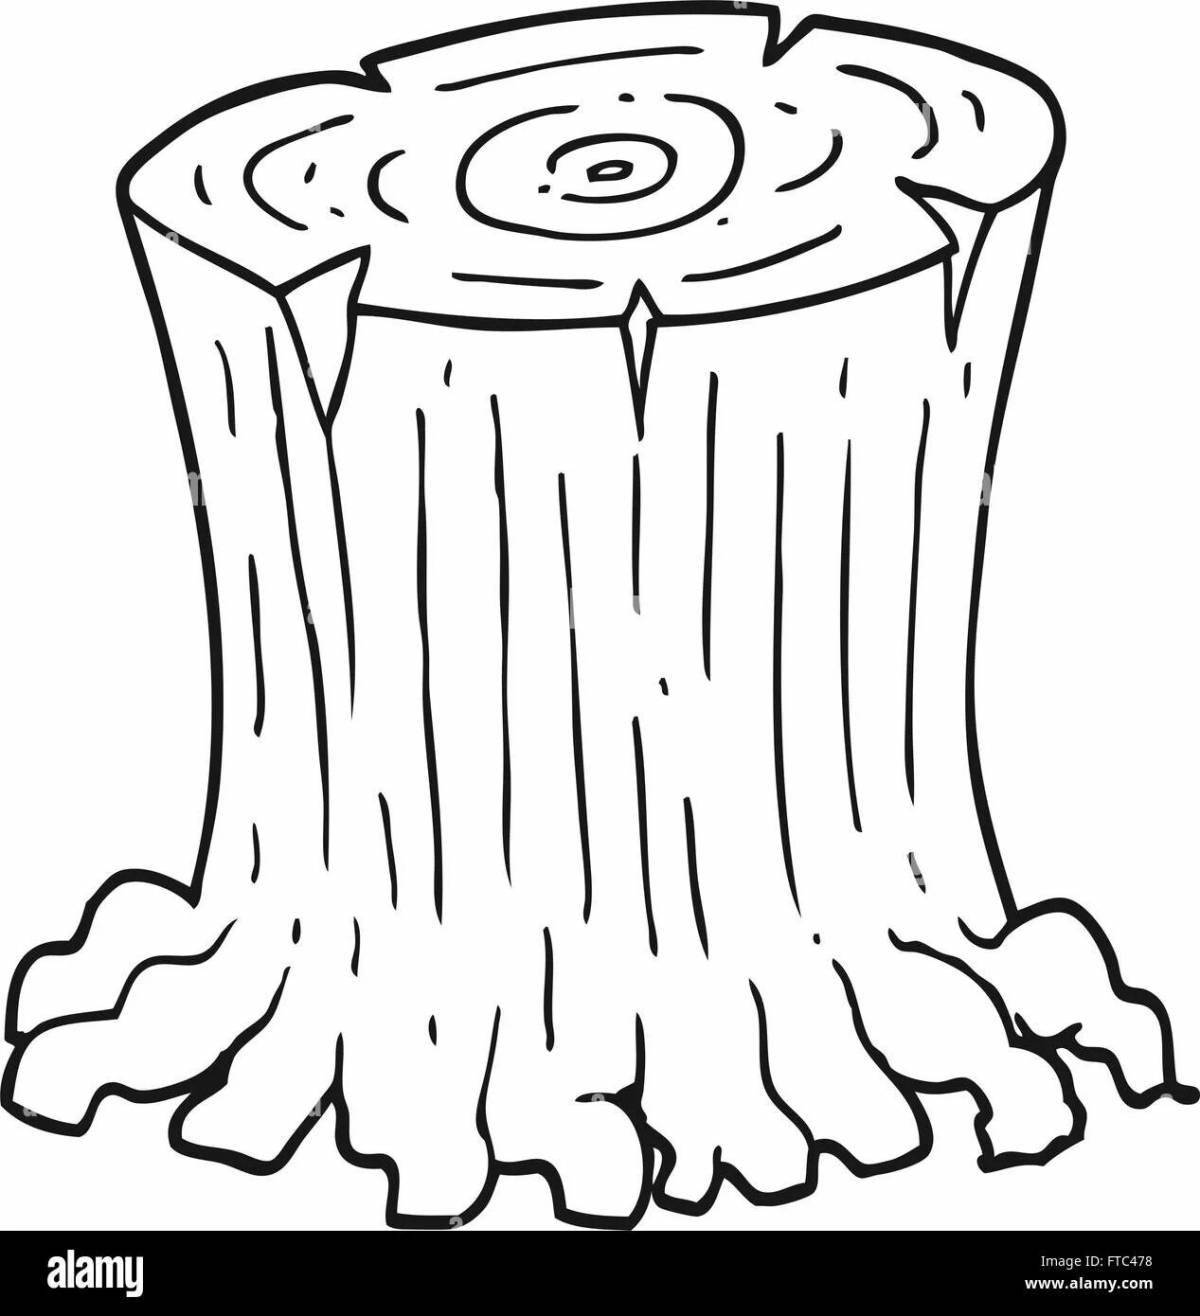 Sparkling tree stump coloring book for preschoolers